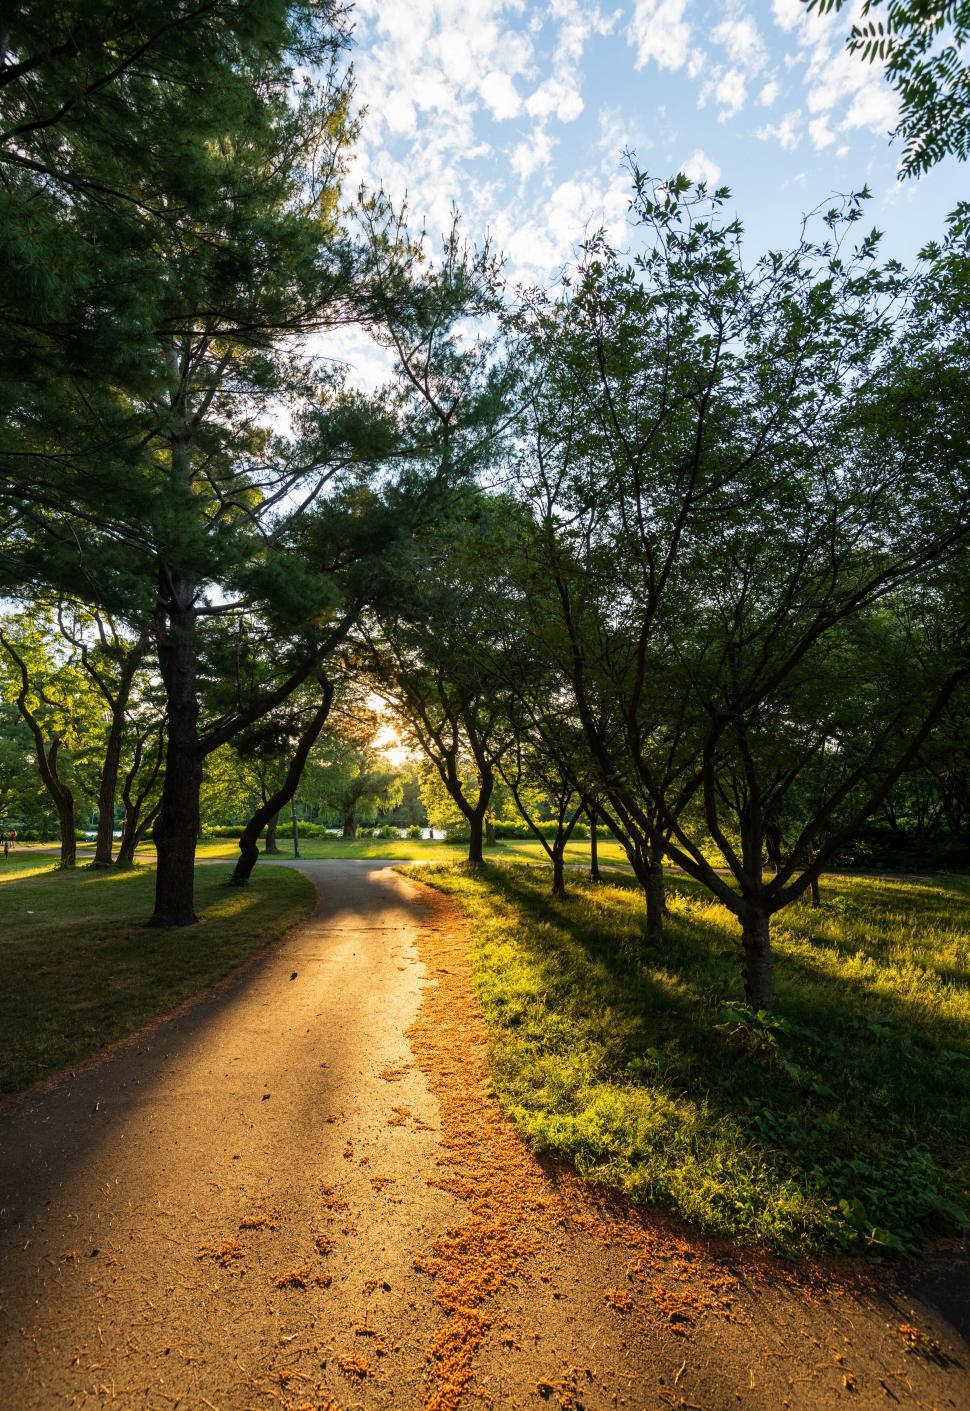 Free Image of Sunlit pathway in a serene green park 